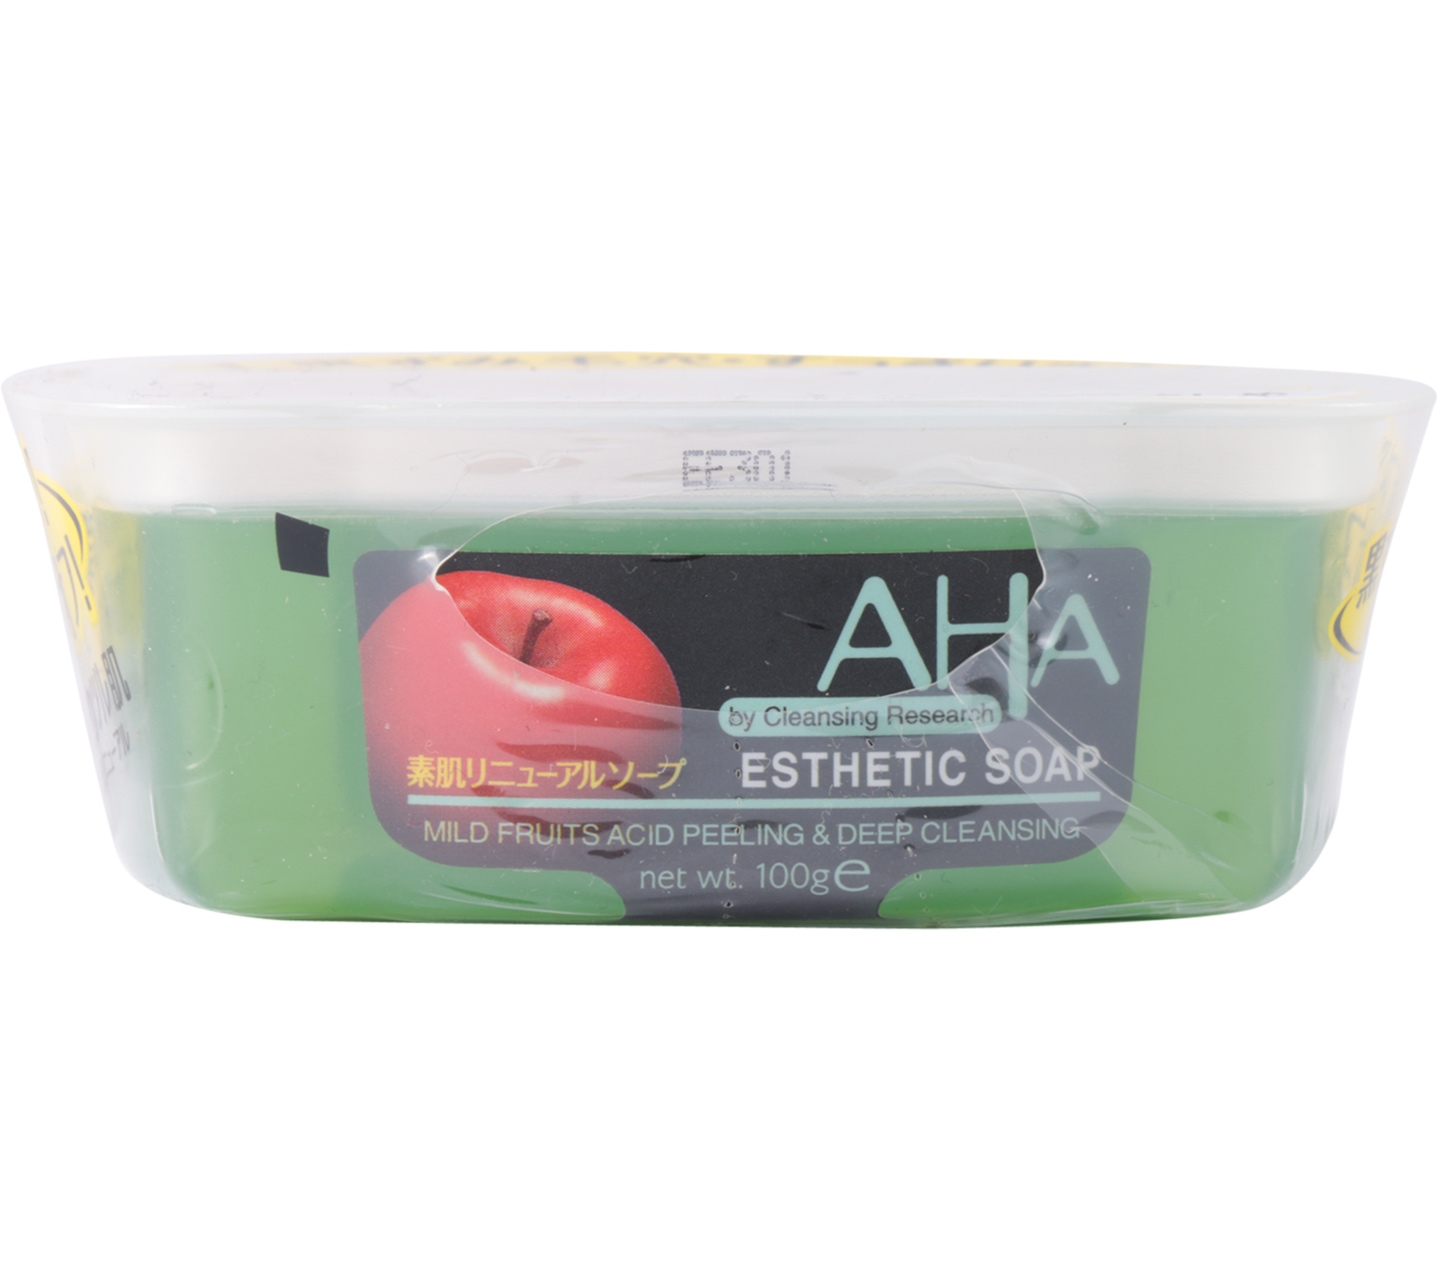 AHA Cleansing Research Esthetic Soap Skin Care